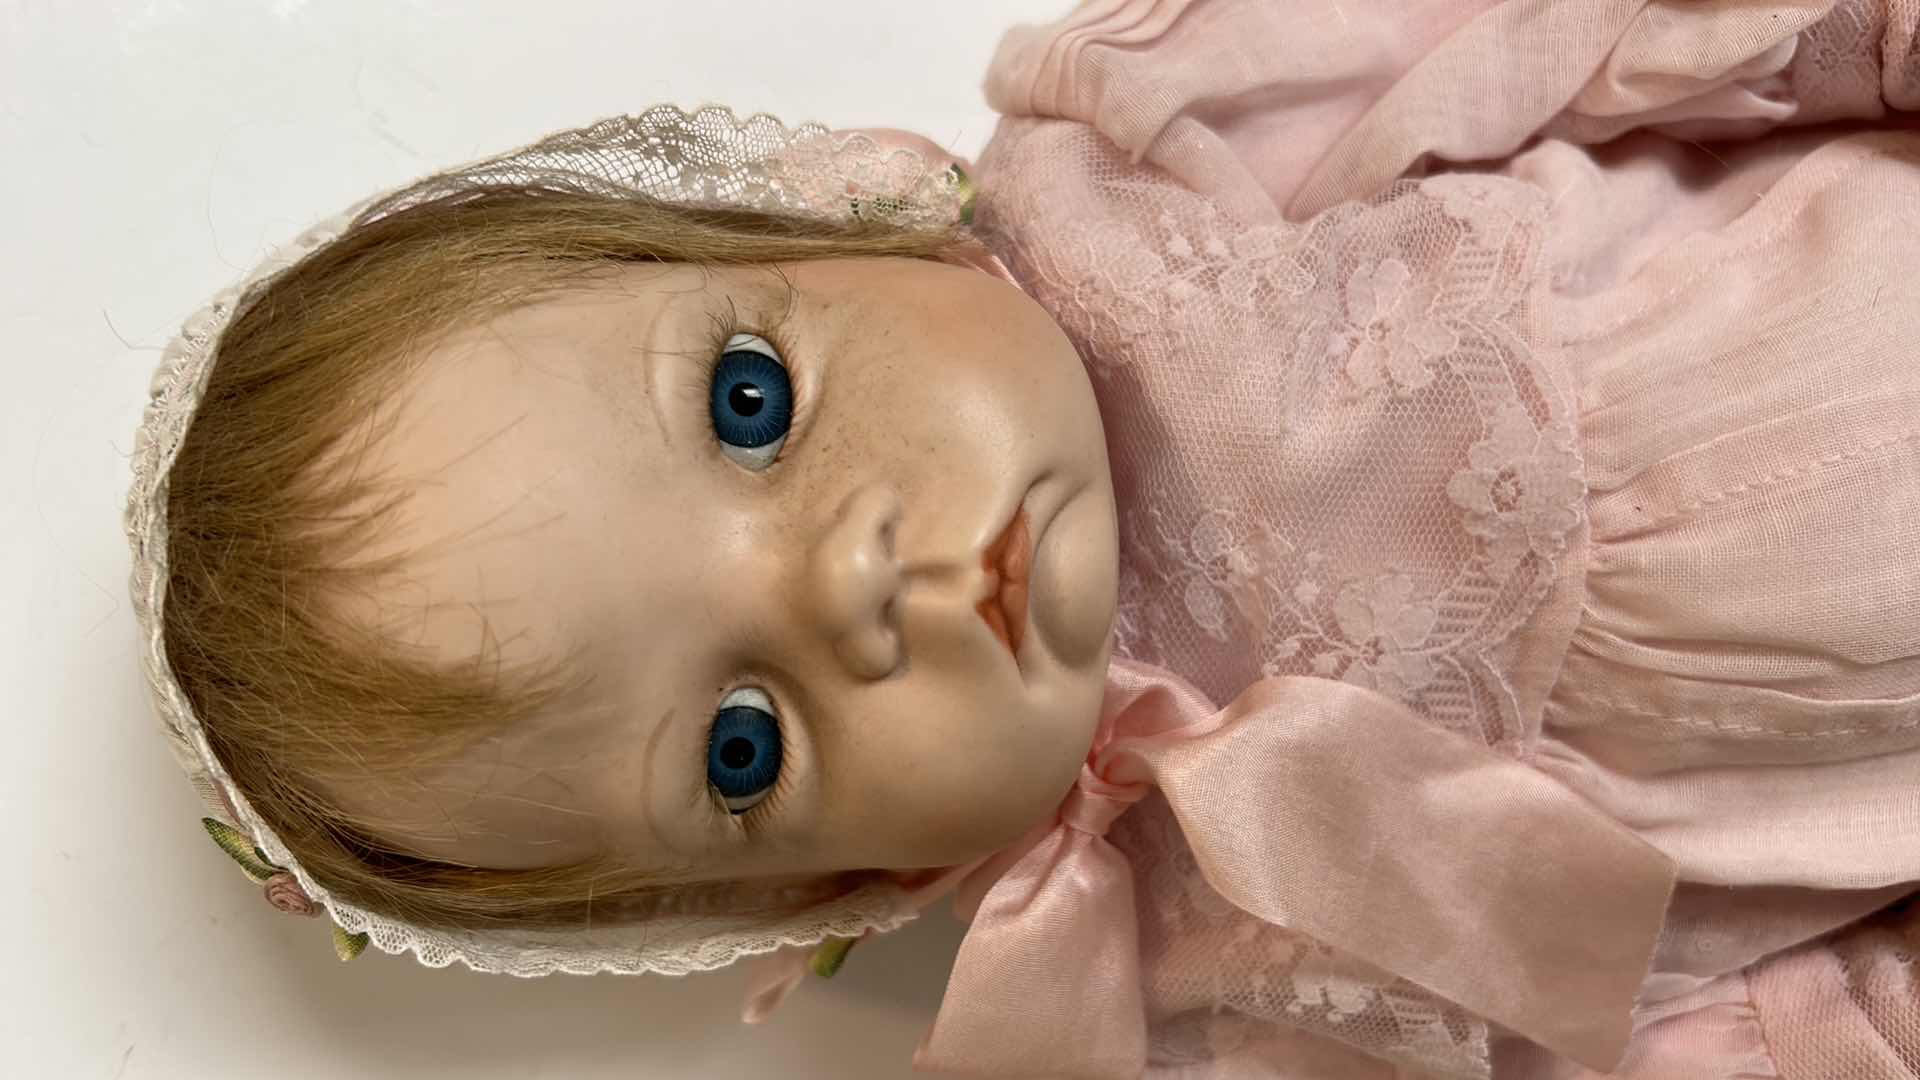 Photo 2 of VINTAGE PORCELAIN REAL LIFE LIKE BABY DOLL - MARY JO 87 H22”